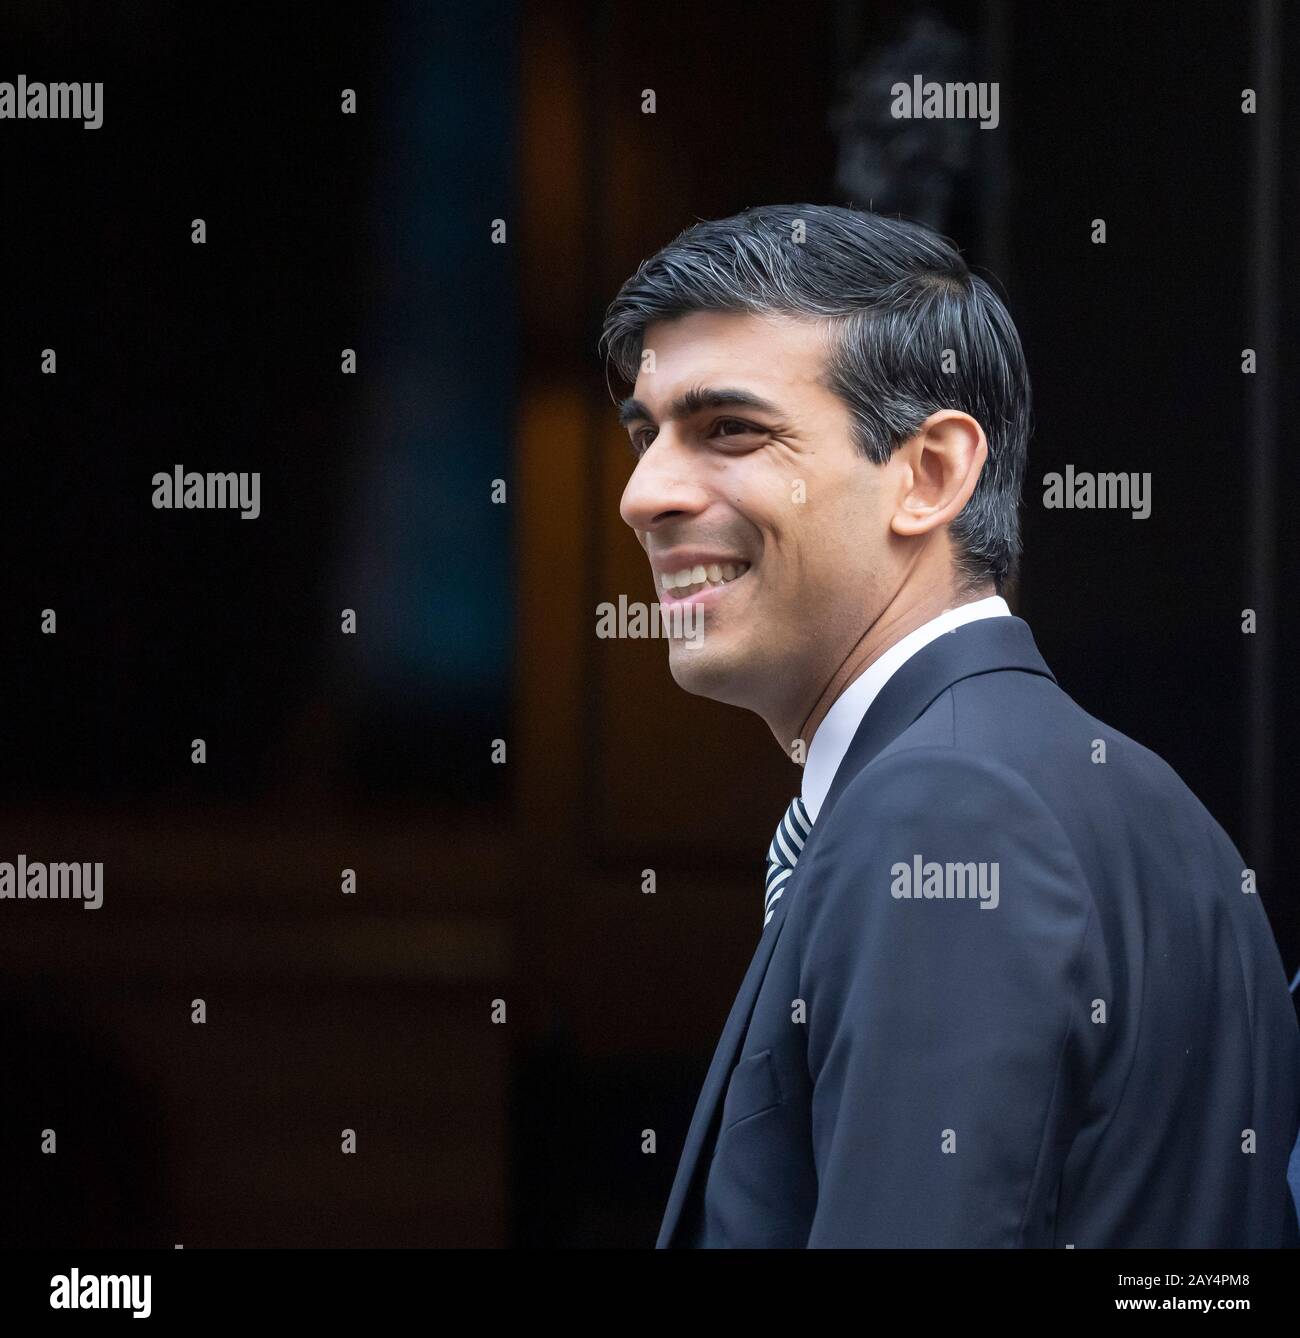 Downing Street, London, UK. 14th February 2020. Rishi Sunak MP, Chancellor of the Exchequer, arrives at 10 Downing Street for weekly cabinet meeting. Credit: Malcolm Park/Alamy. Stock Photo